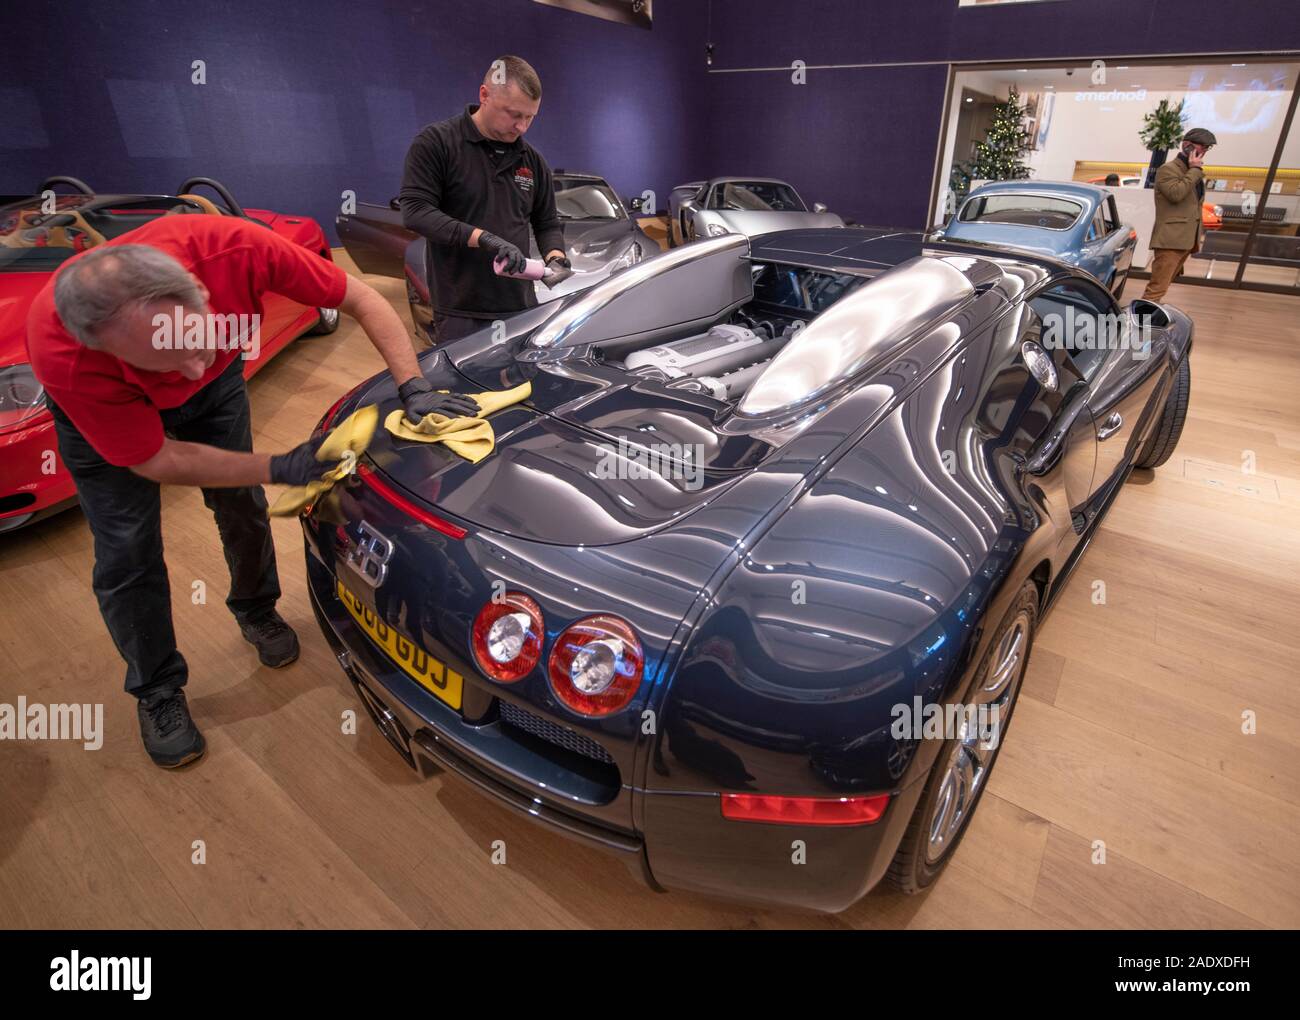 Bonhams, London, UK. 5th December 2019. Bonhams Bond Street Fine Collectors’ Motor Car sale preview includes cars owned by Jay Kay, Barbara Hutton, HRH The Prince of Wales, Jools Holland. The sale takes place on 7th December. Image: Final polish for The first UK supplied example 2006 Bugatti Veyron EB 16.4 Coupé. Estimate: £850,000-1,250,000. Credit: Malcolm Park/Alamy Live News. Stock Photo